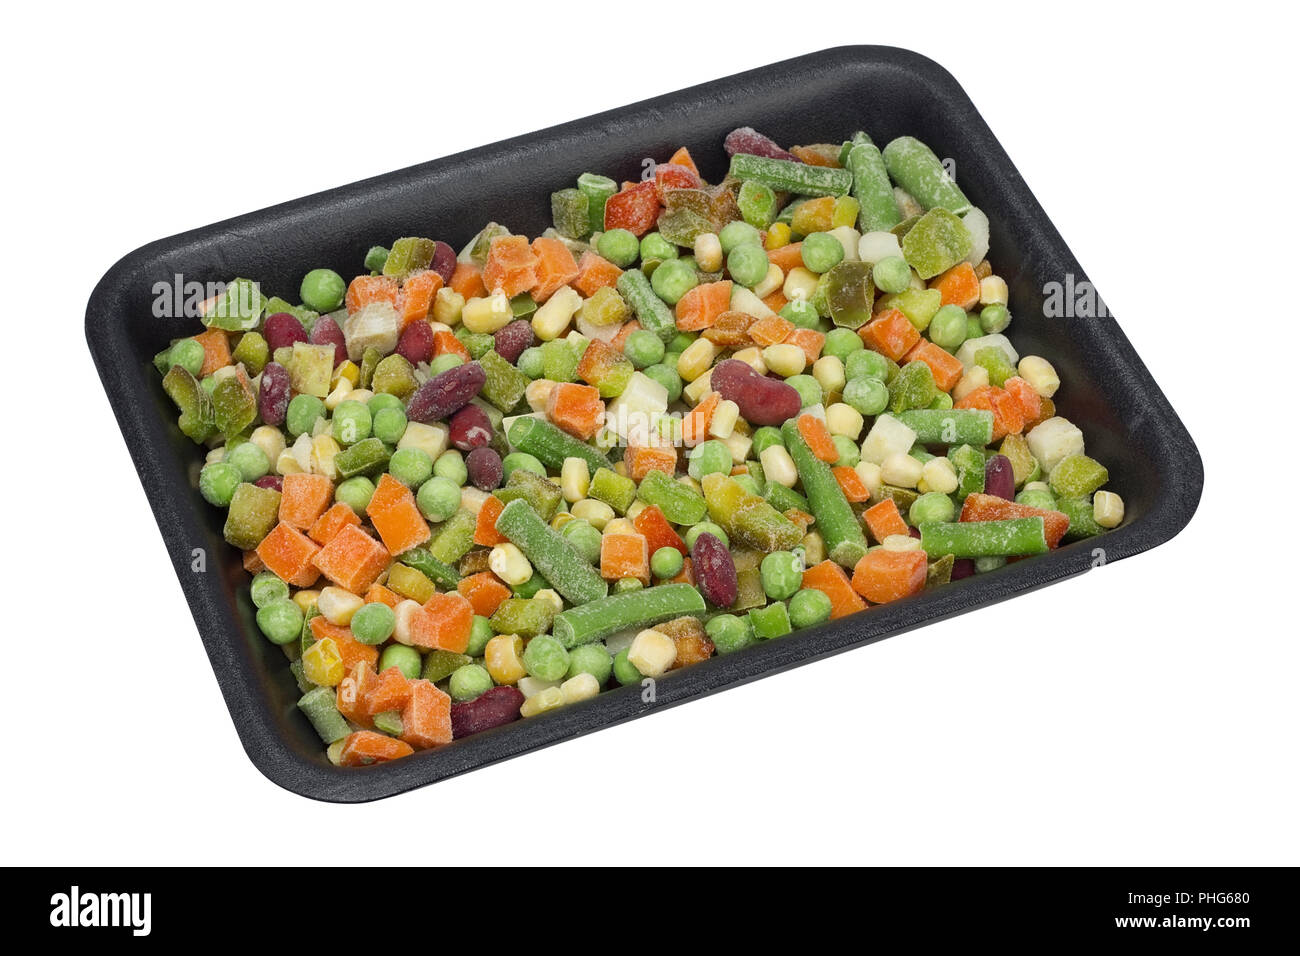 Container with frozen mixed vegetables Stock Photo